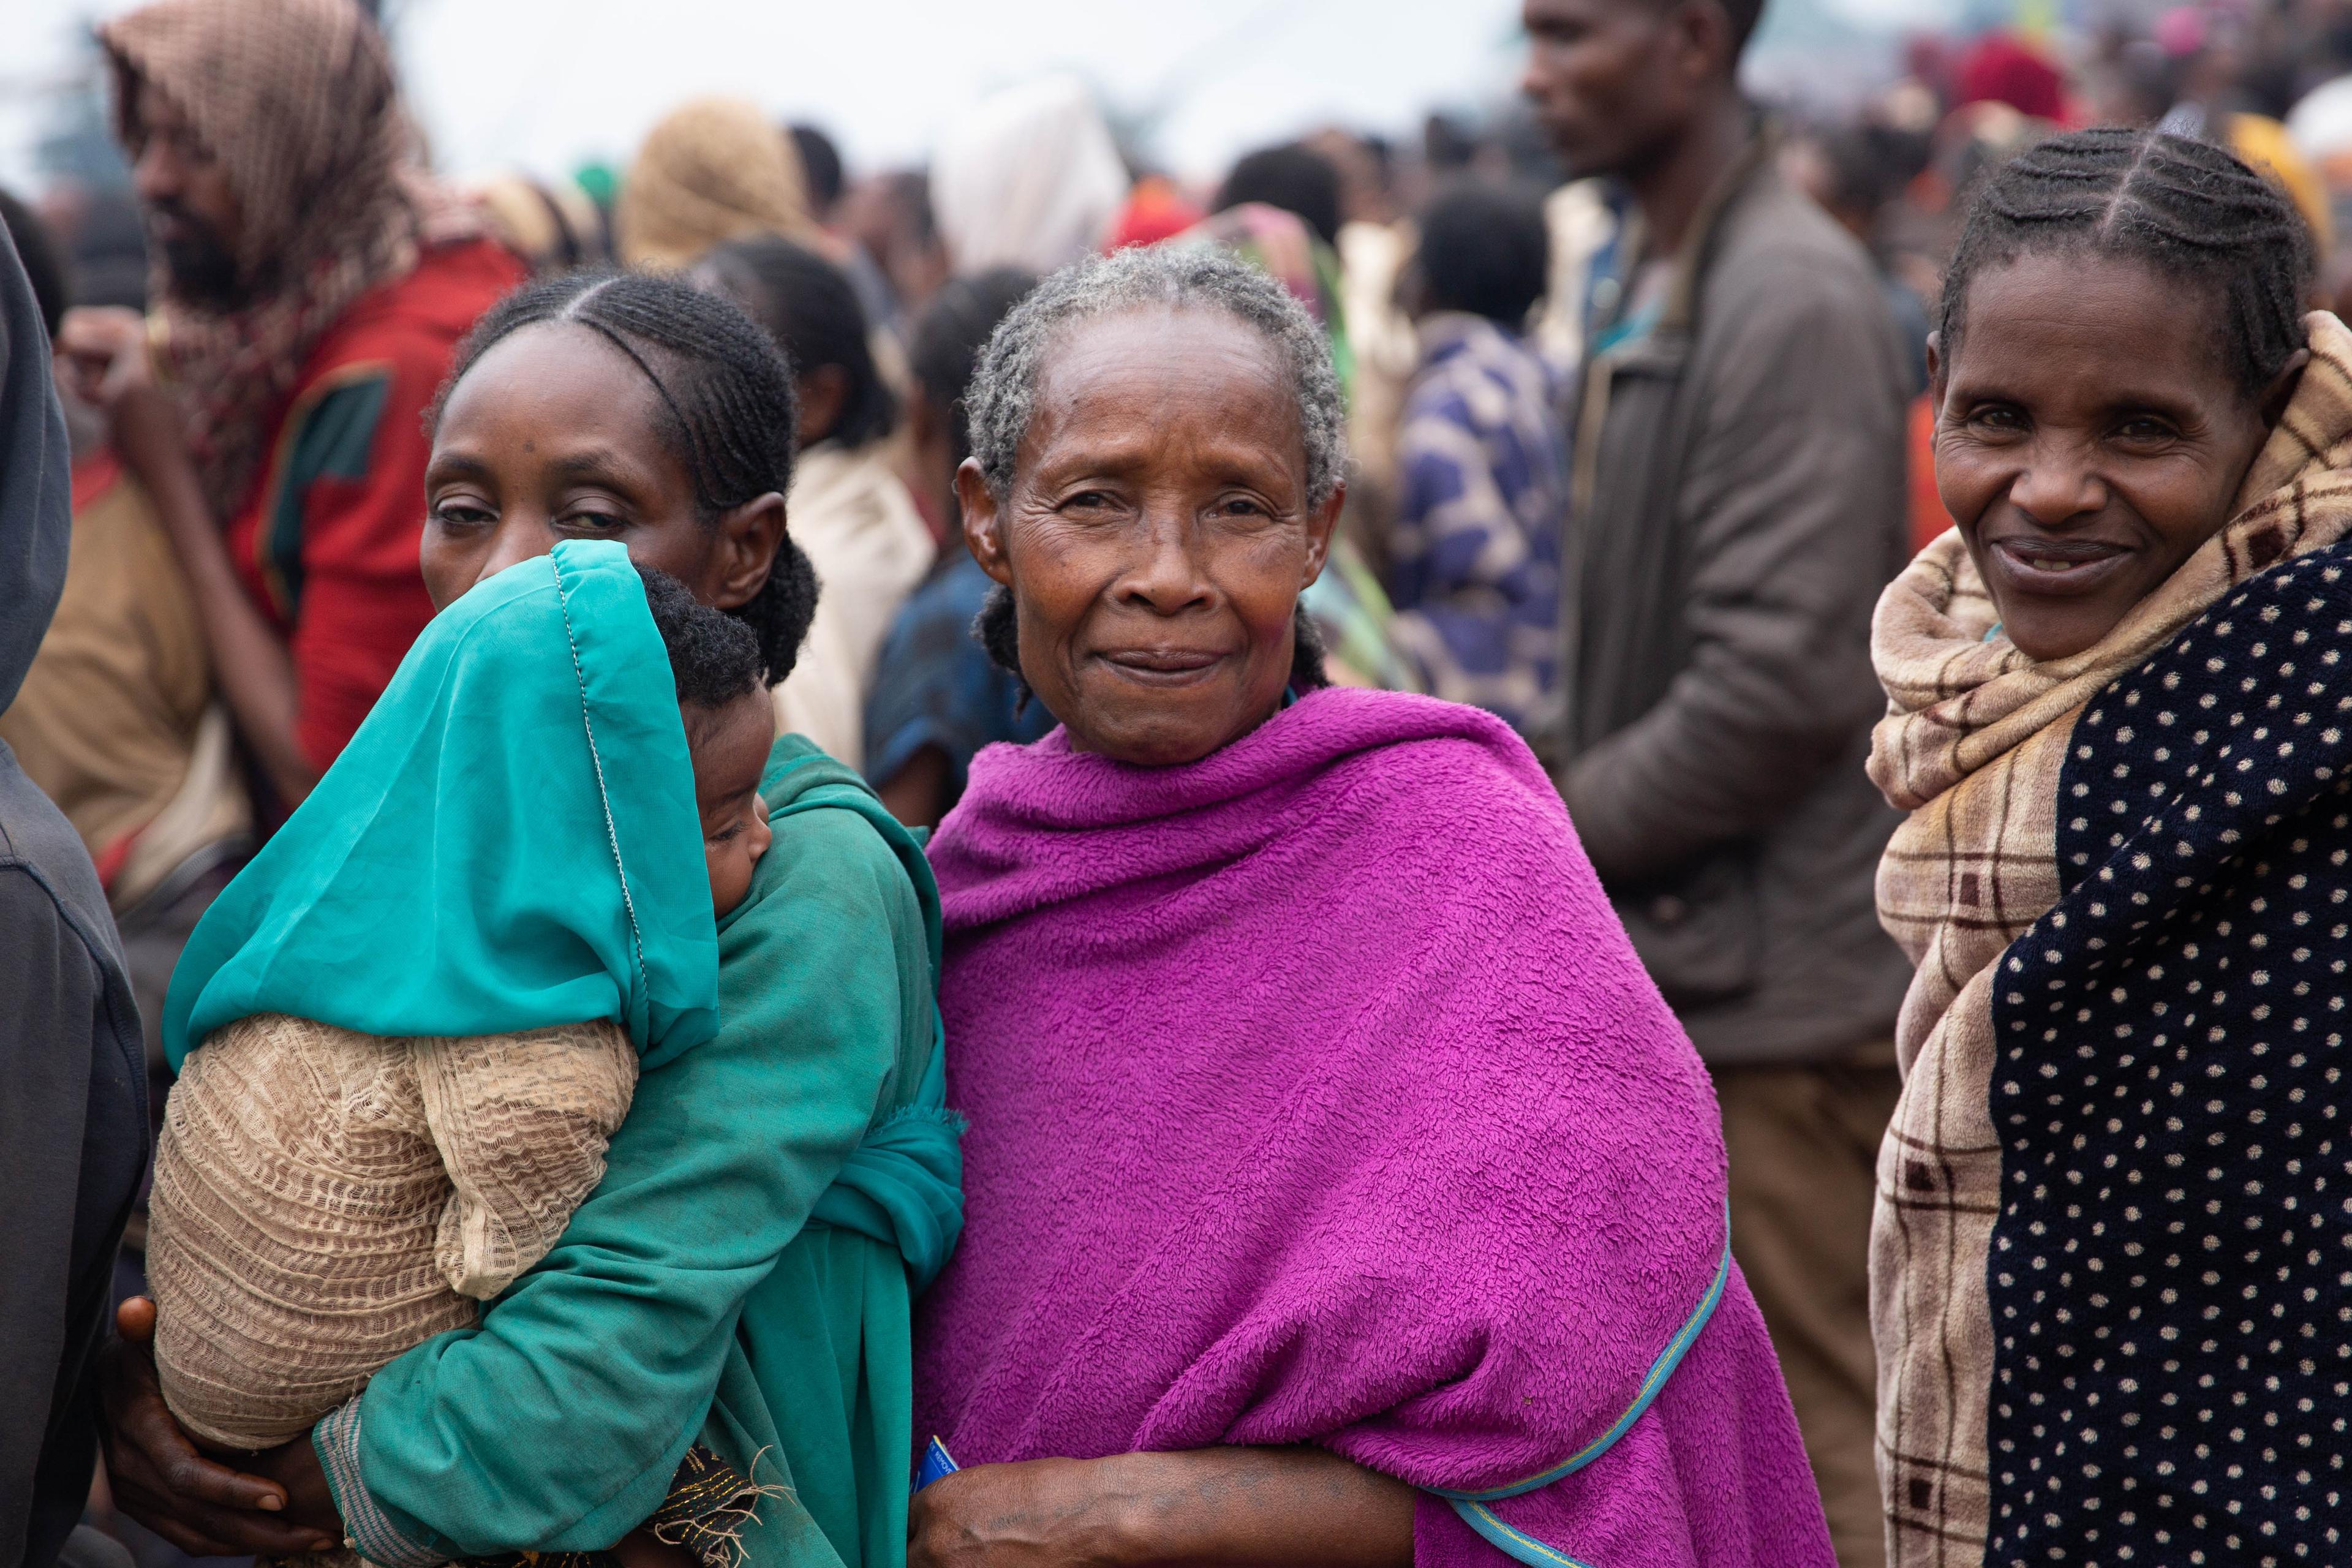 Displaced persons in line to receive aid items in Gedeb, Ethiopia.